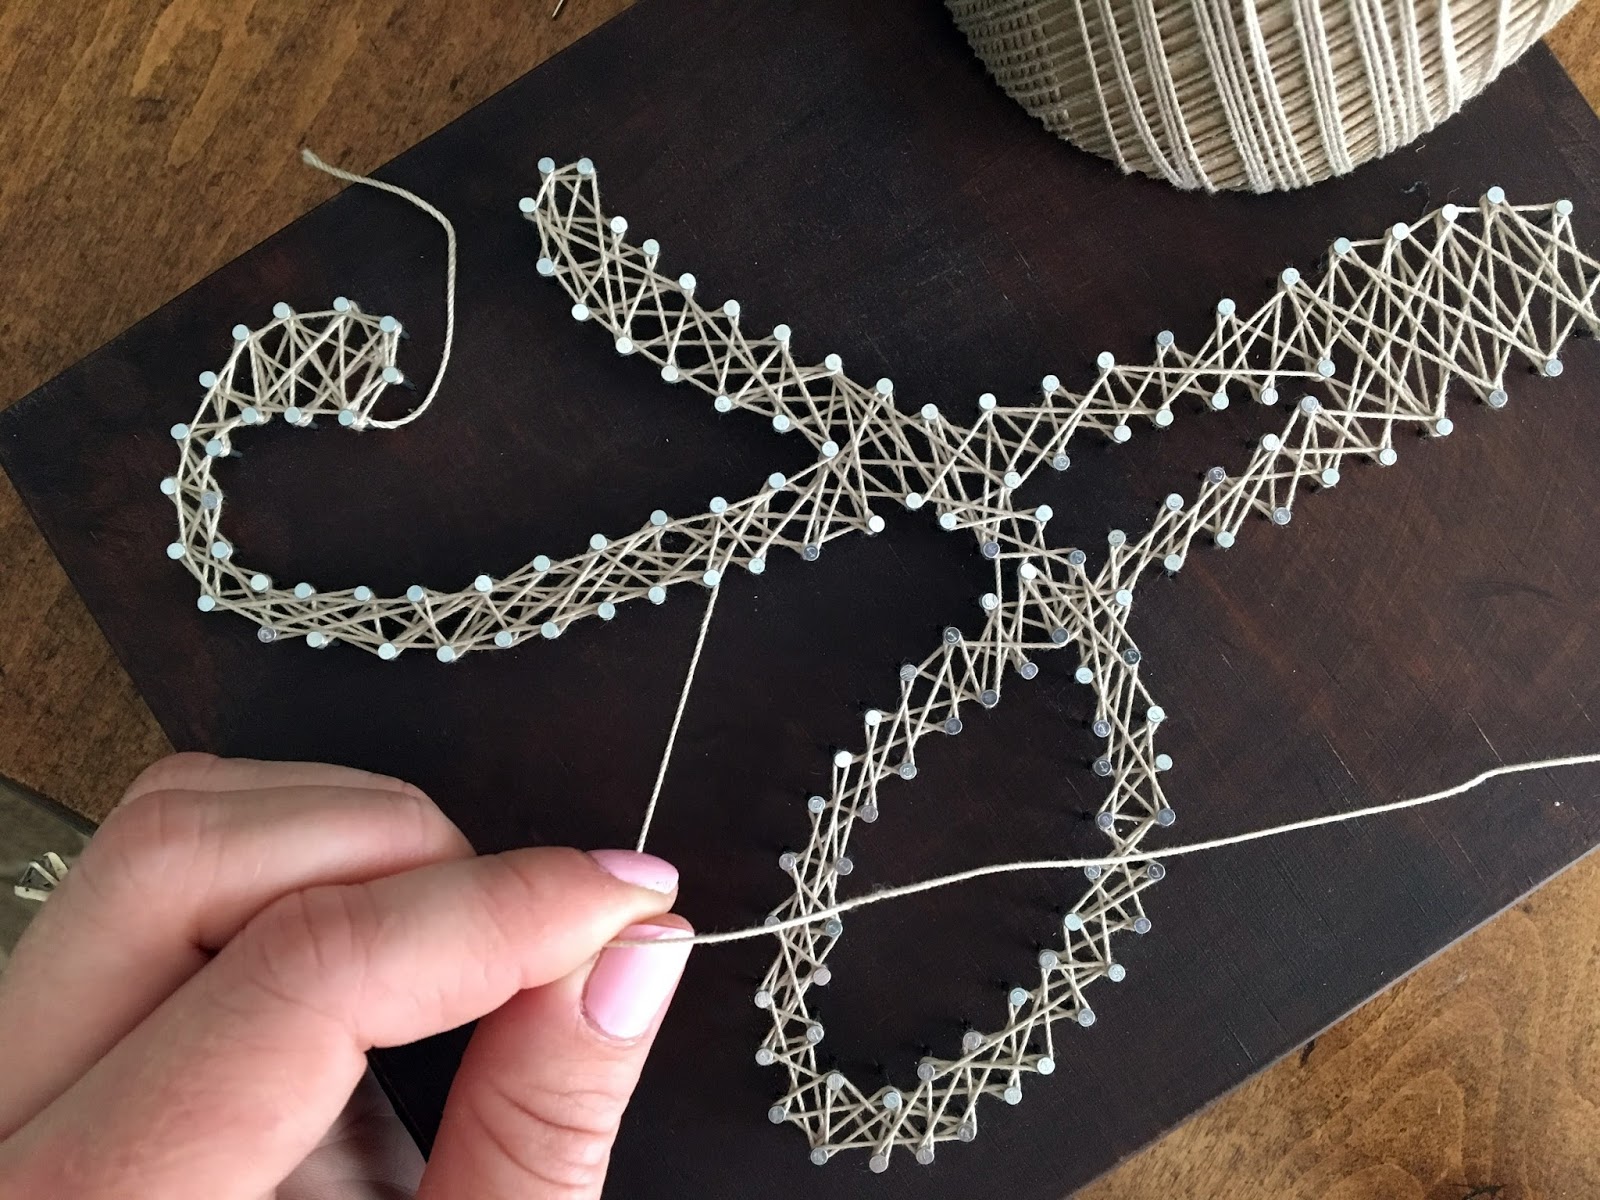 7. "Nail String Art: A Complete Guide to Creating Beautiful Designs" by Rachel Johnson - wide 1